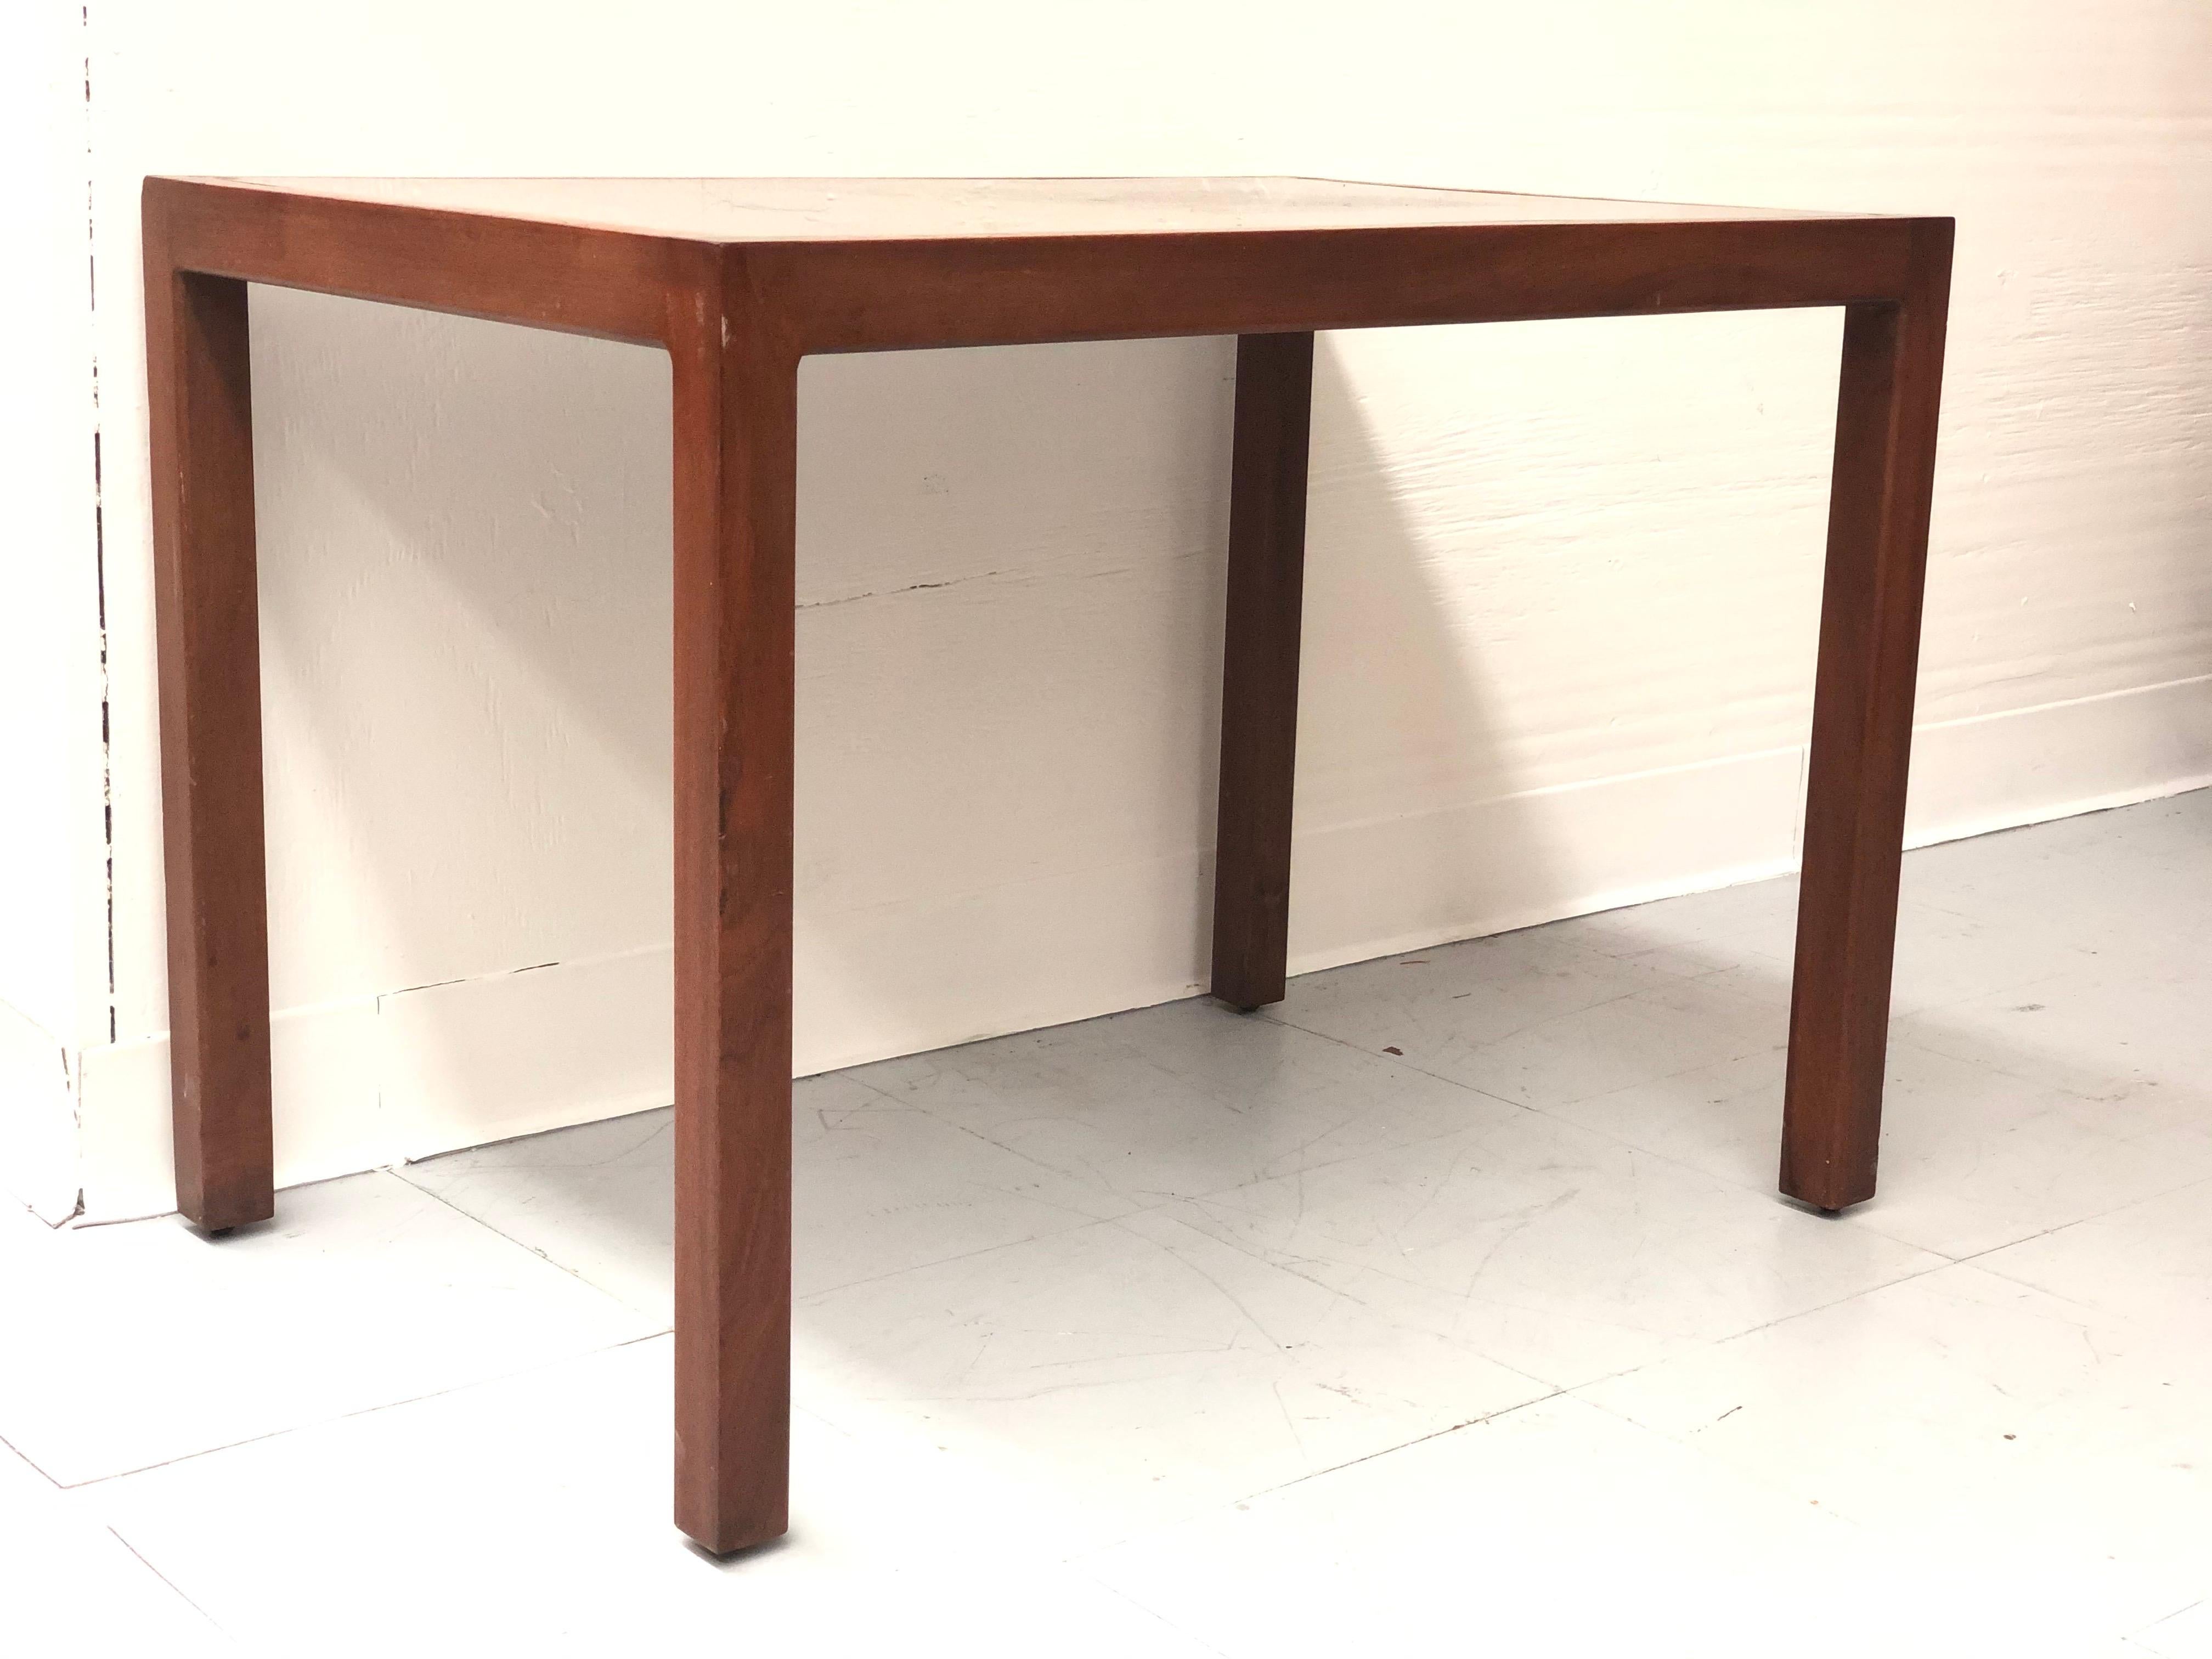 Vintage Mid-Century Modern table stand.

Dimensions. 30 W ; 22 H ; 20 D.